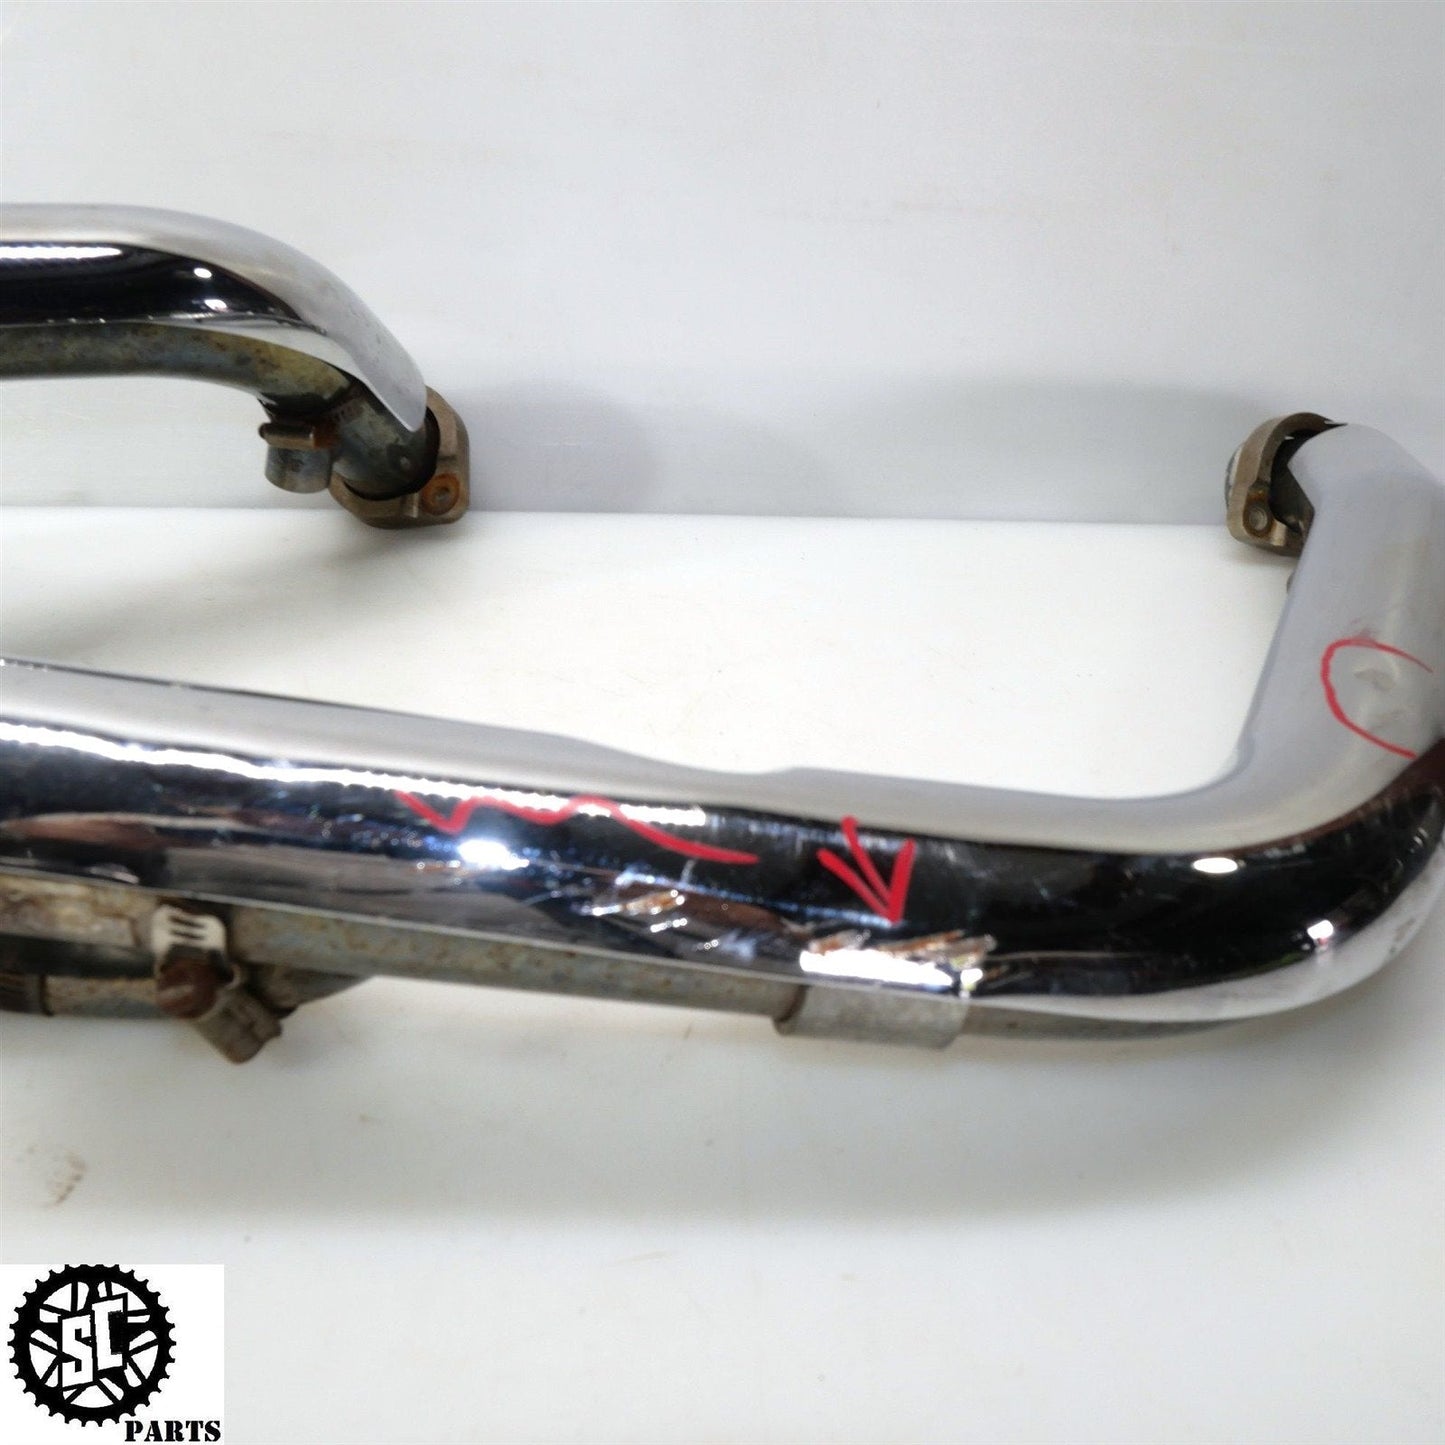 2007-2017 HARLEY-DAVIDSON DYNA EXHAUST HEADER PIPES HD21